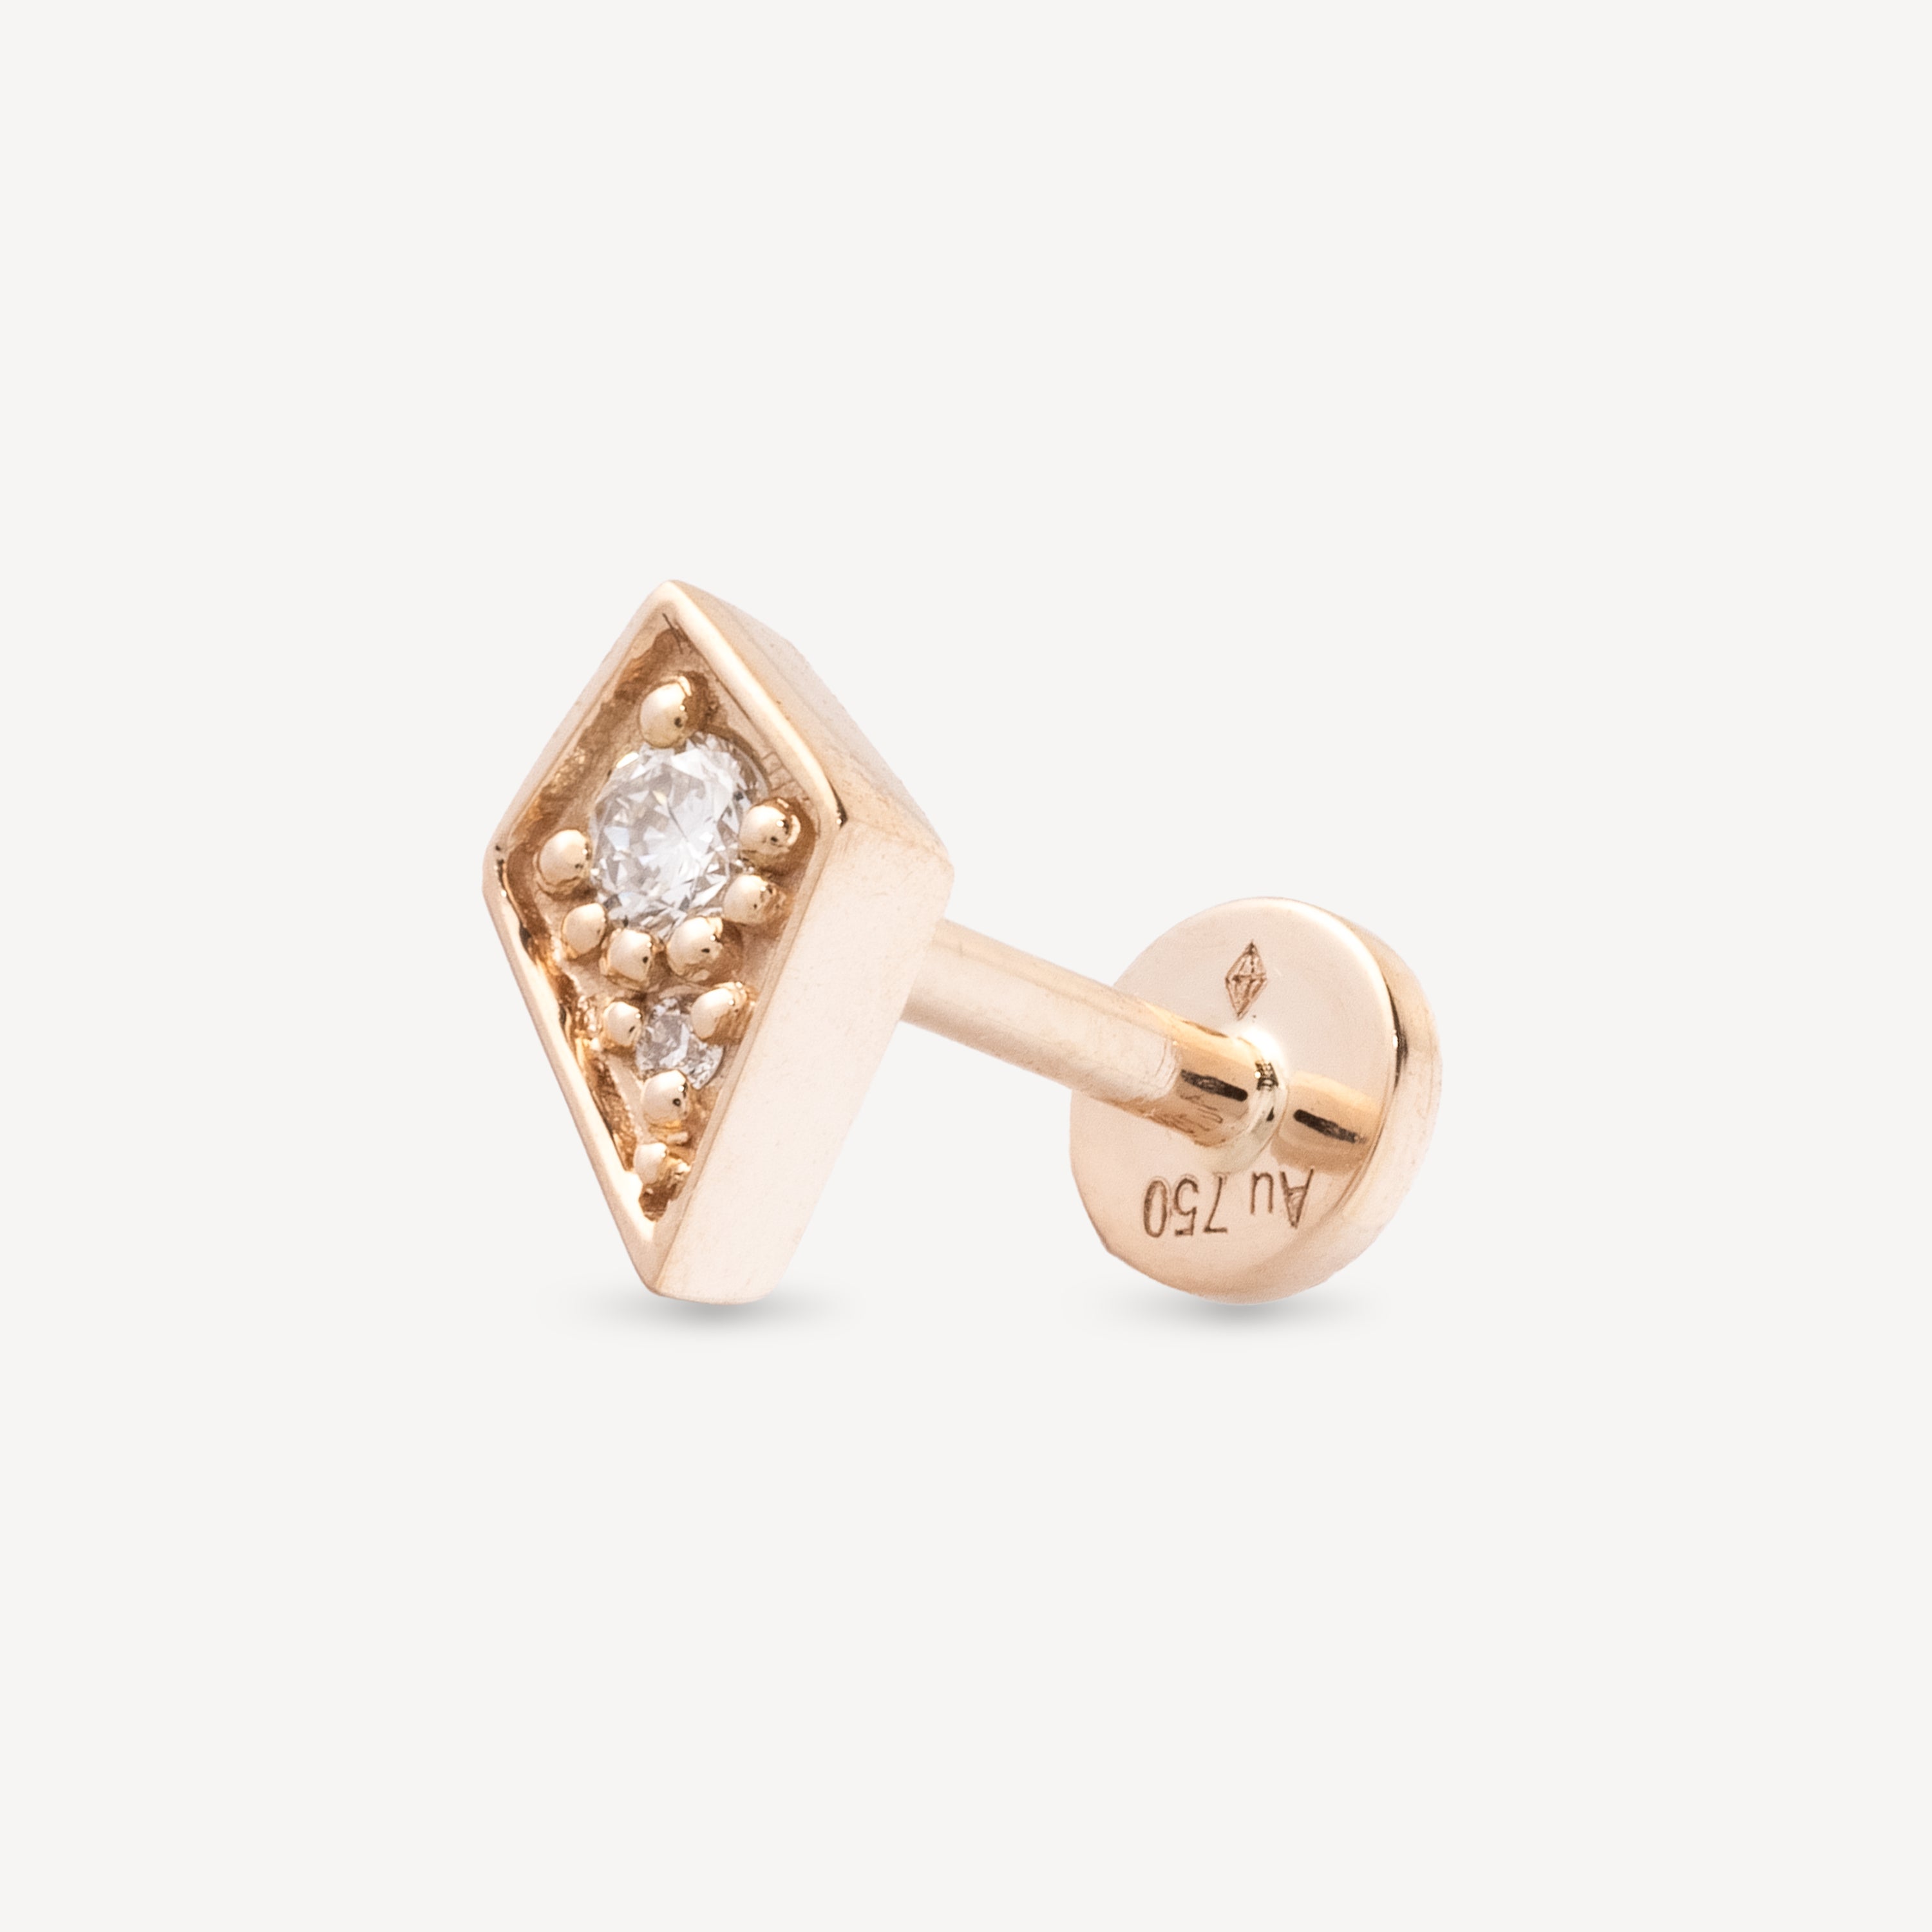 Diamond and Rose Gold Stairway Piercing